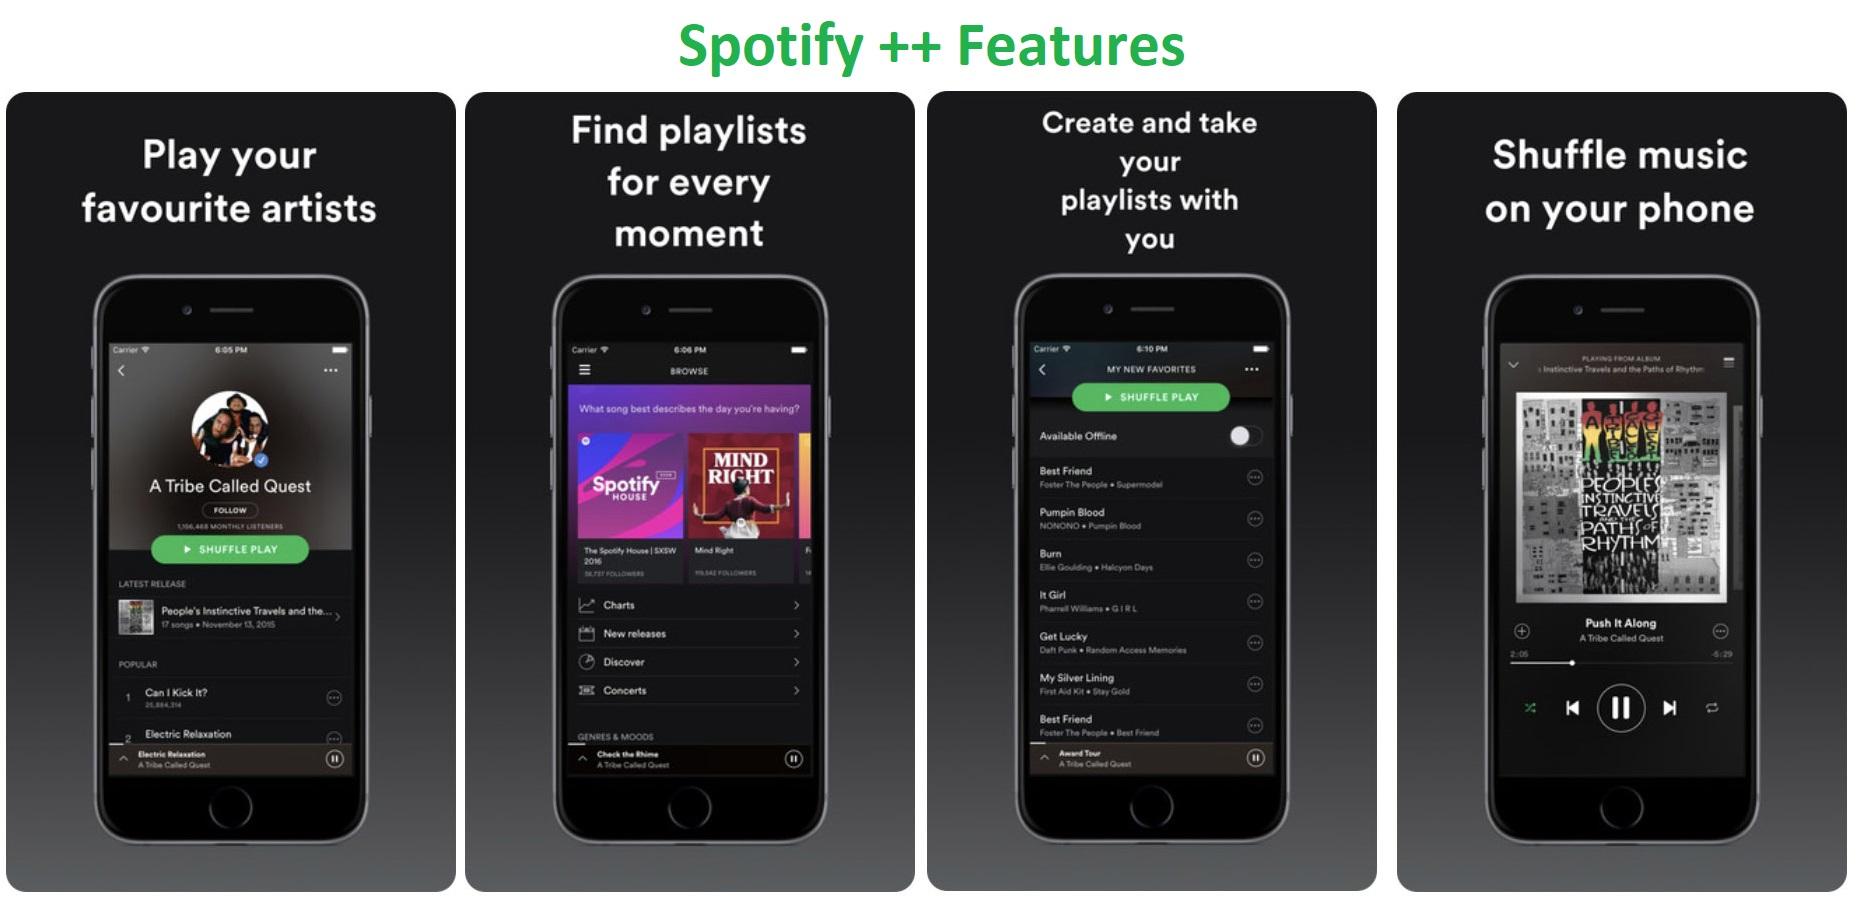 Spotify++ iPA features